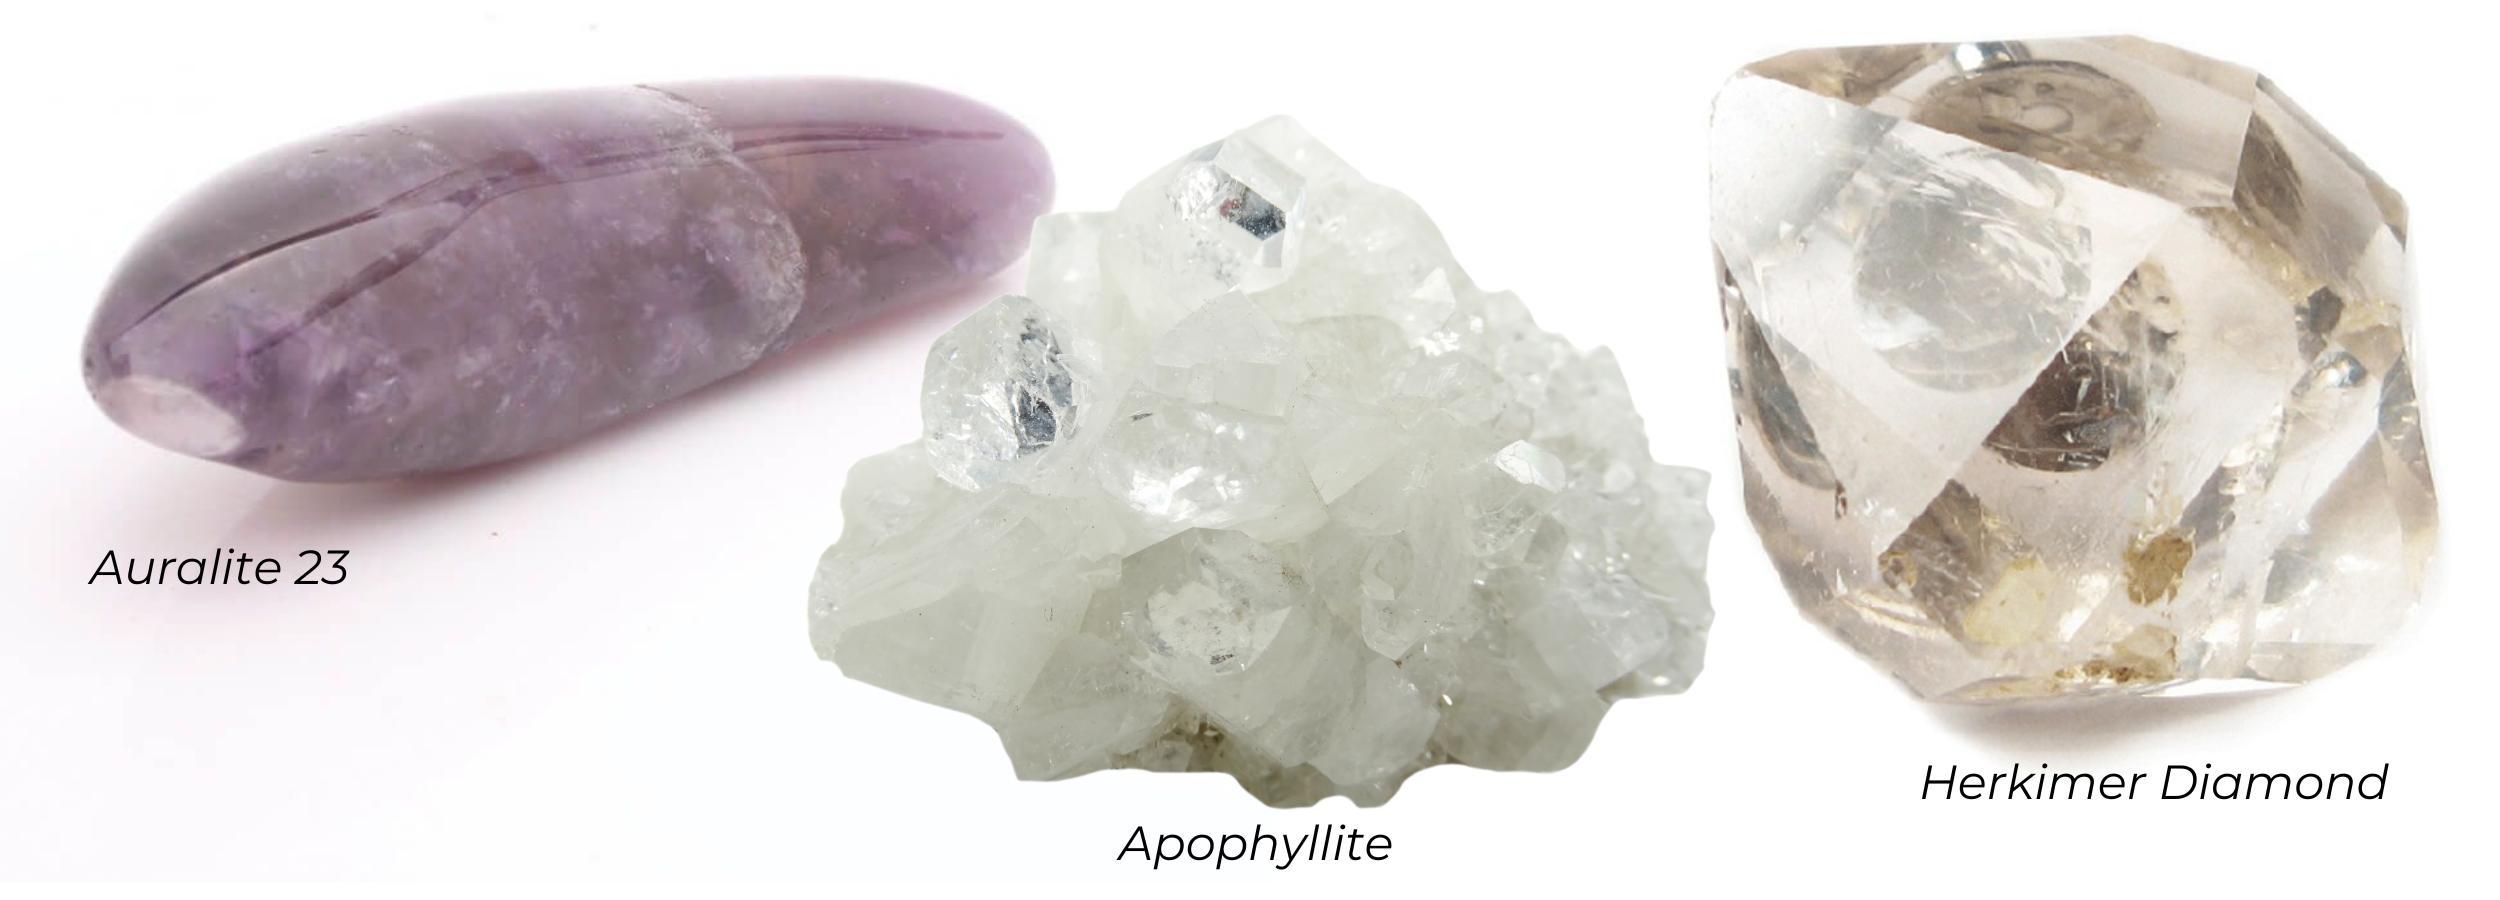 Auralite 23, Apophyllite and Herkimer Diamonds are perfect crystals for meditation